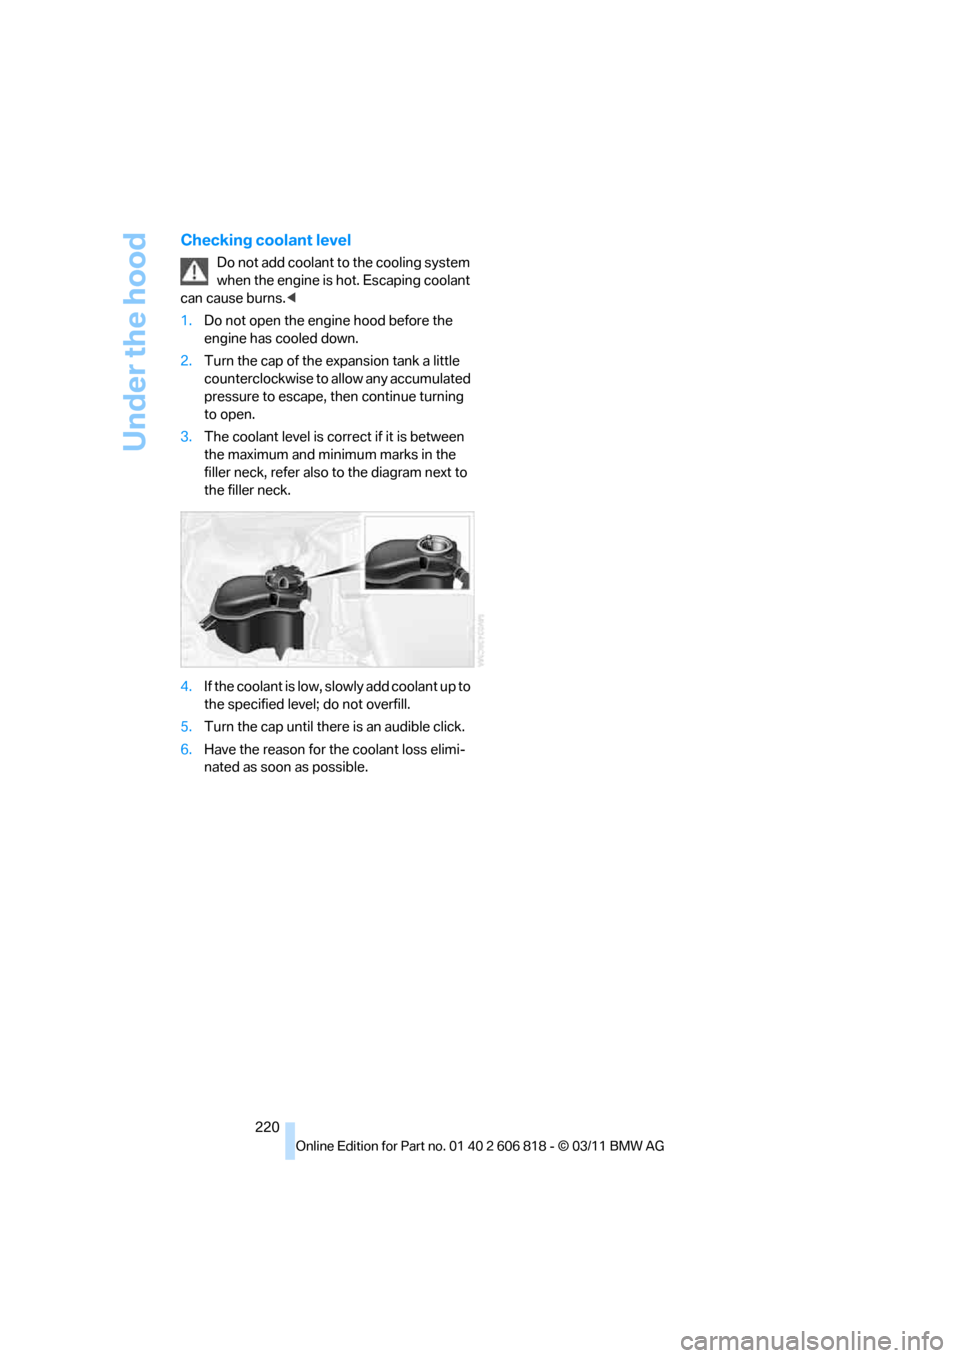 BMW 128I 2012 E88 Owners Manual Under the hood
220
Checking coolant level
Do not add coolant to the cooling system 
when the engine is hot. Escaping coolant 
can cause burns.<
1.Do not open the engine hood before the 
engine has coo